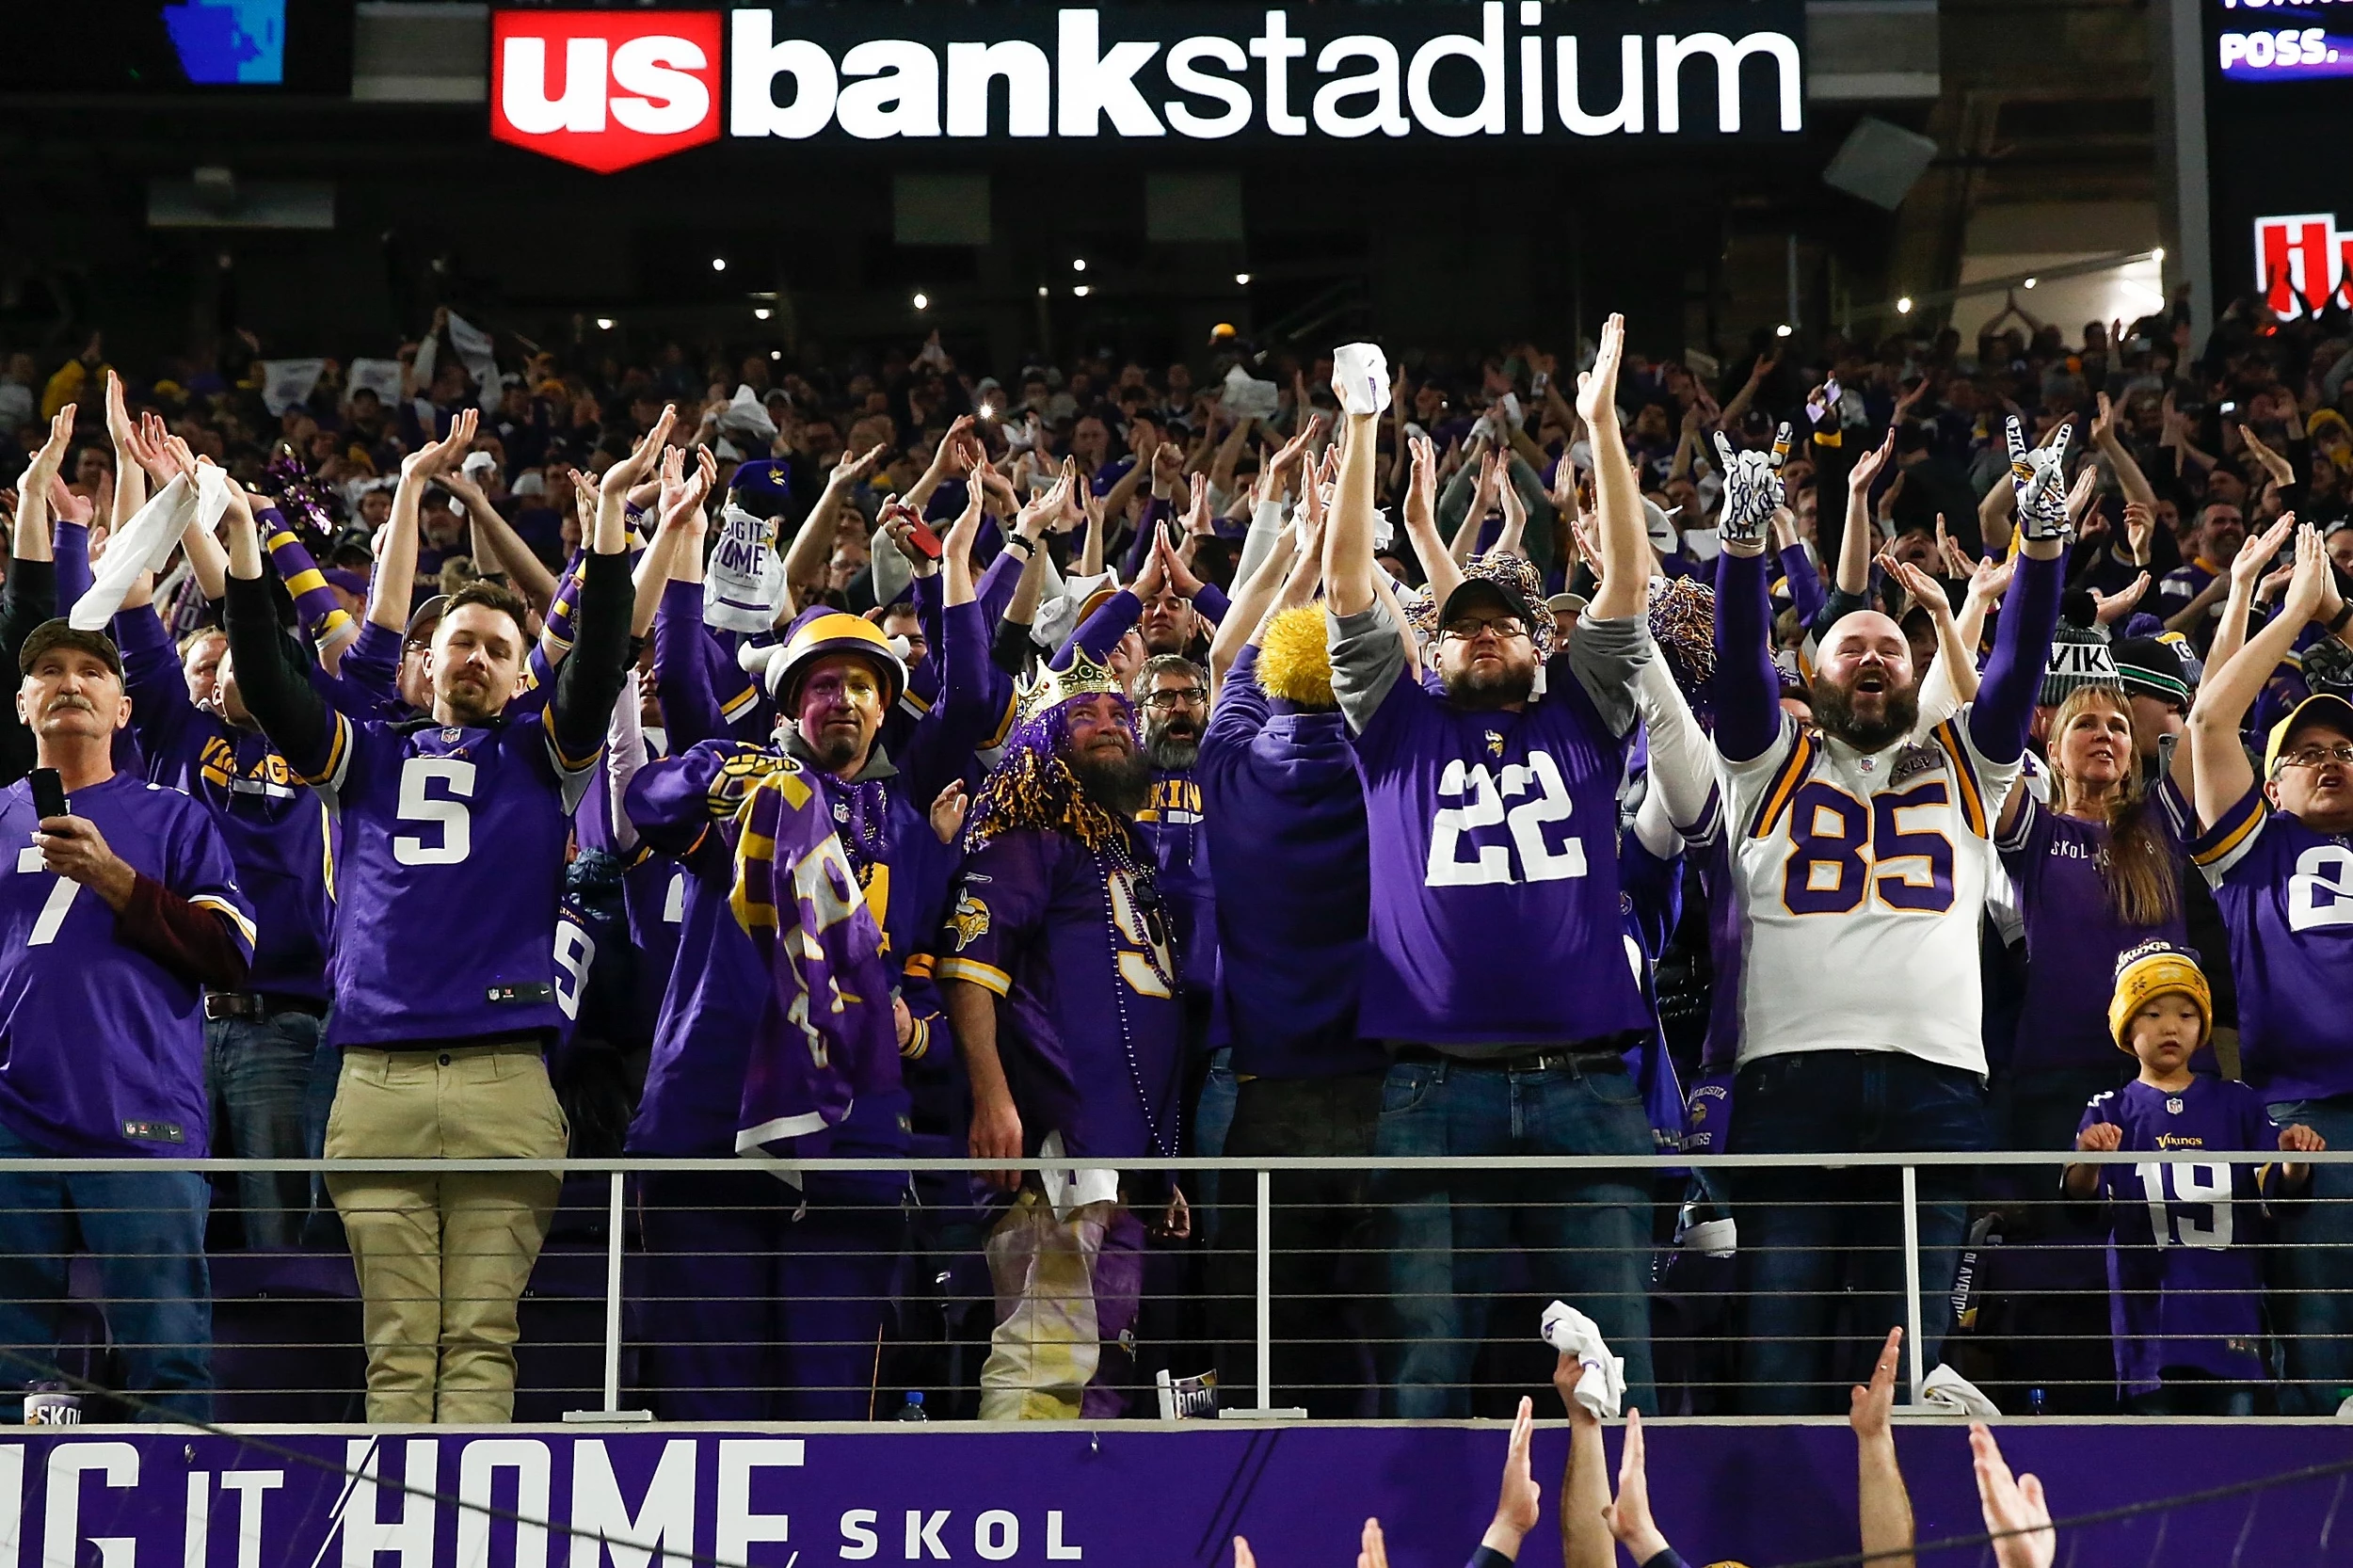 Vikings have average ticket prices on resale market